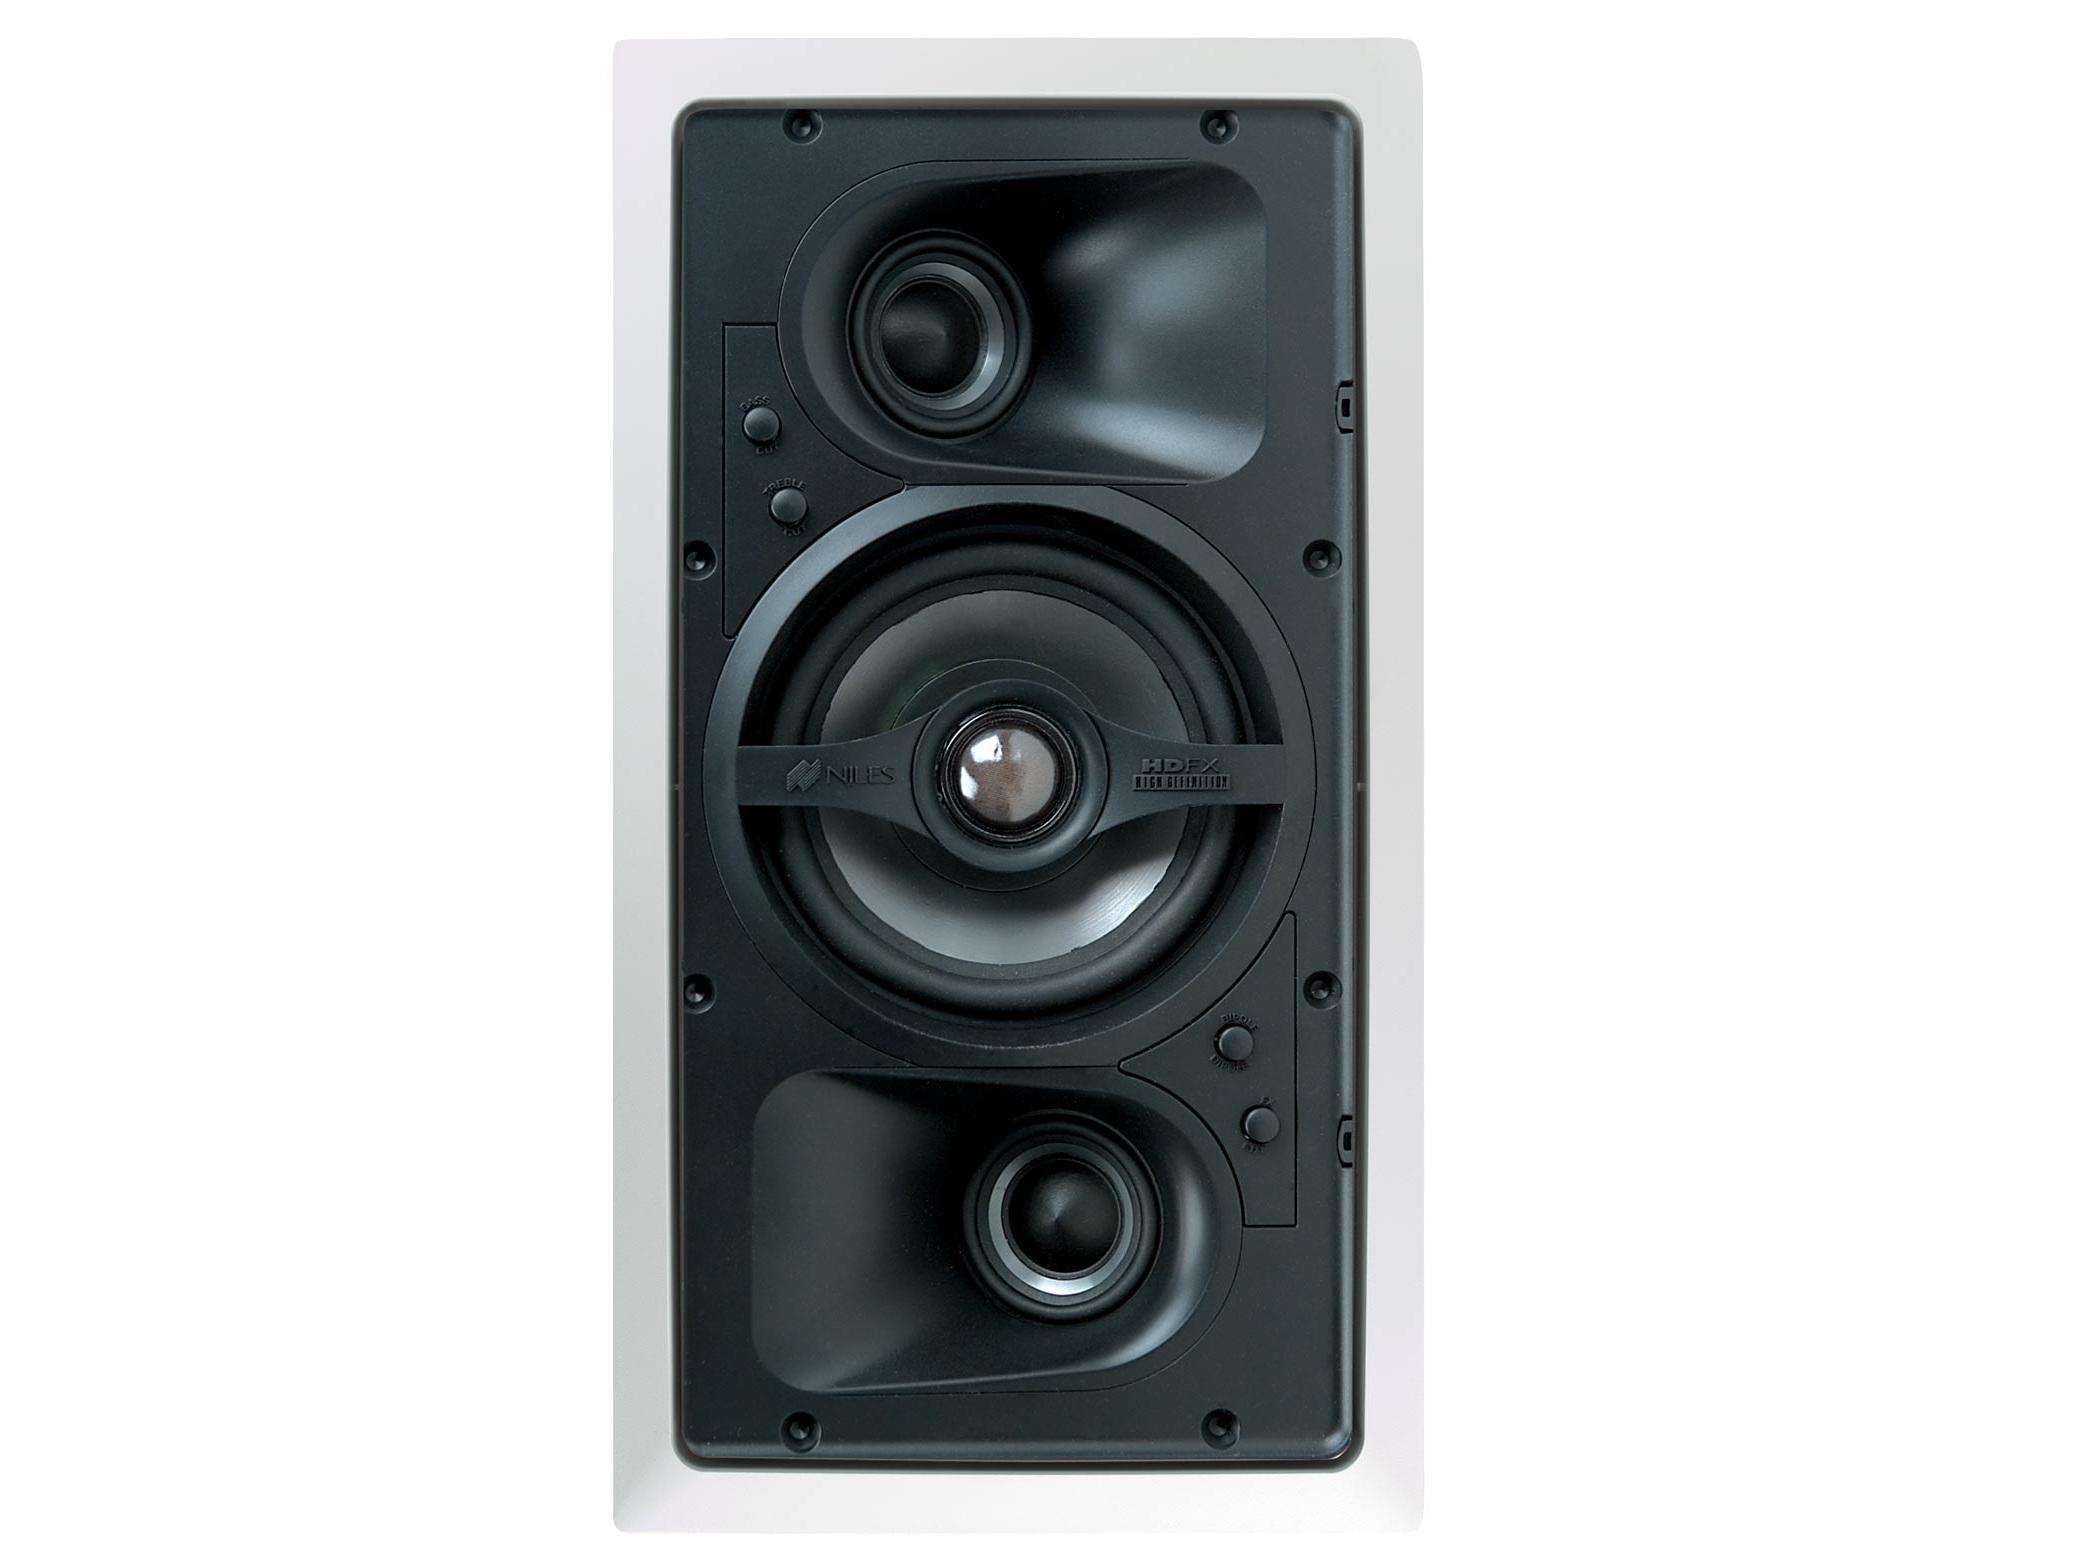 Niles Hdfx Speakers Outdoor Ceiling In Wall On Wall Avprosupply